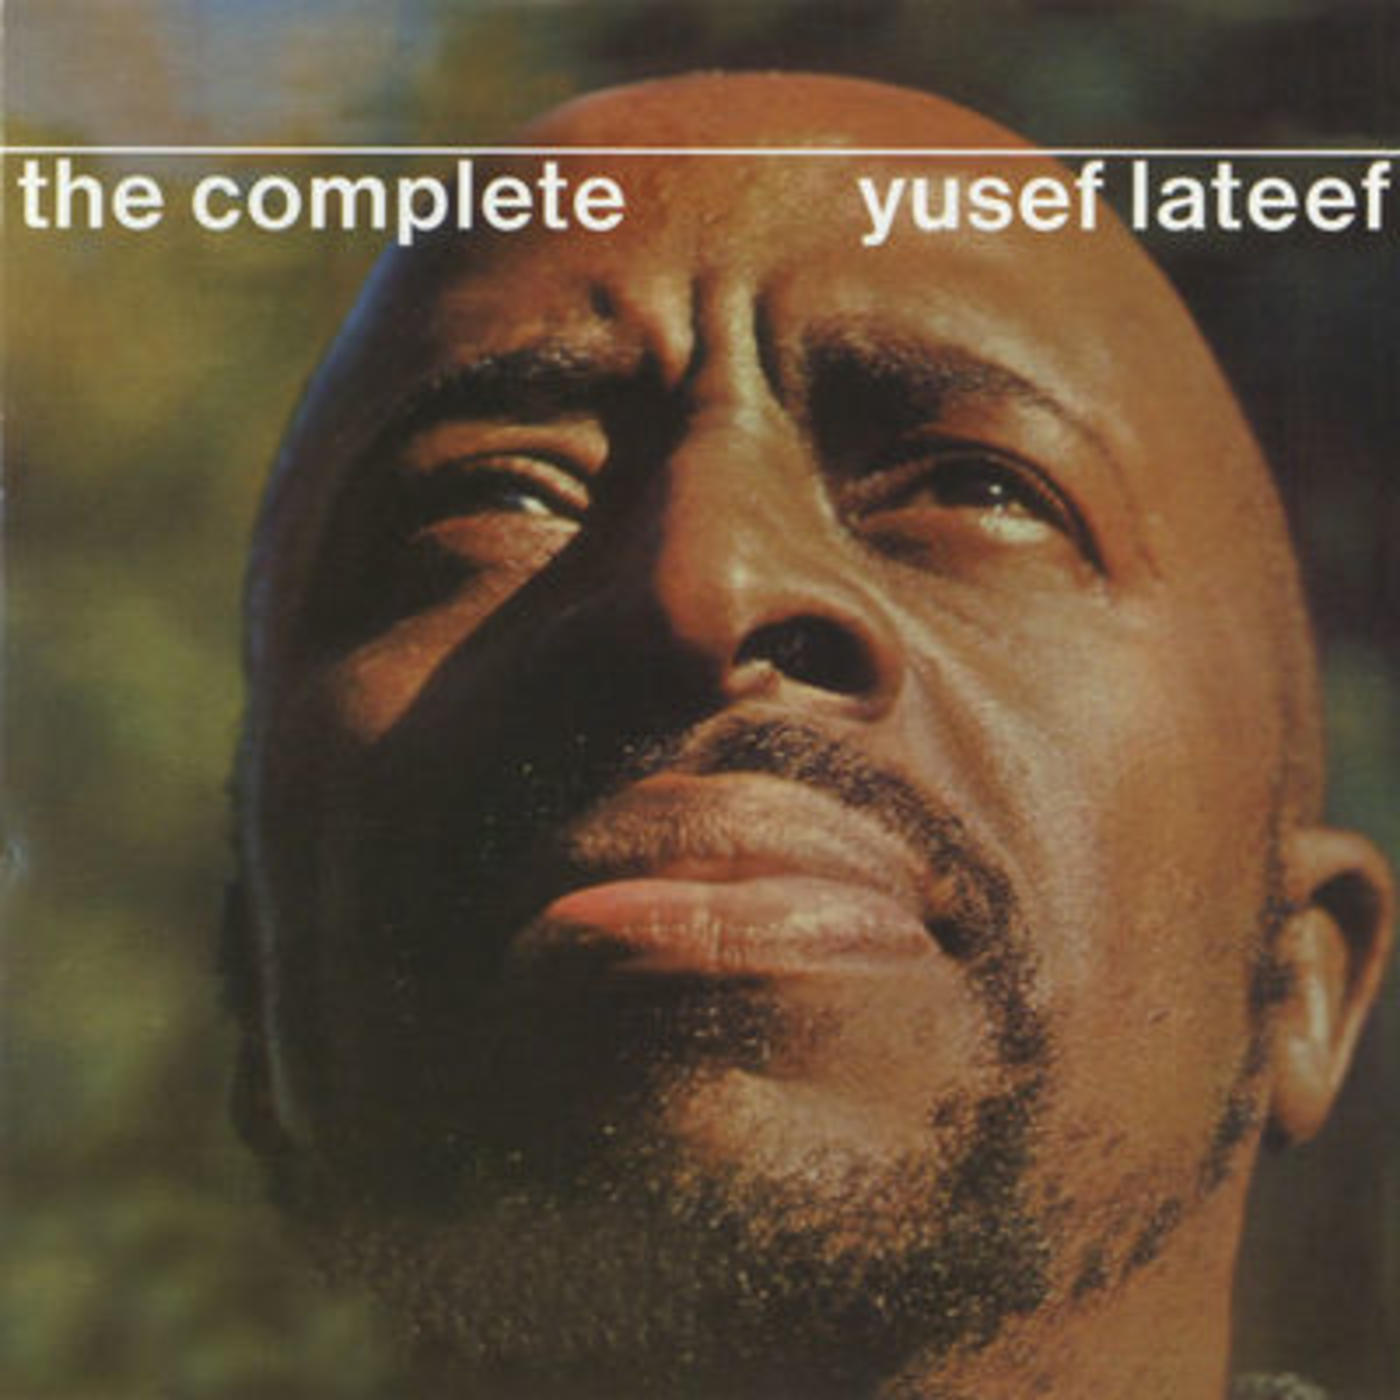 The Complete Yusef Lateef  